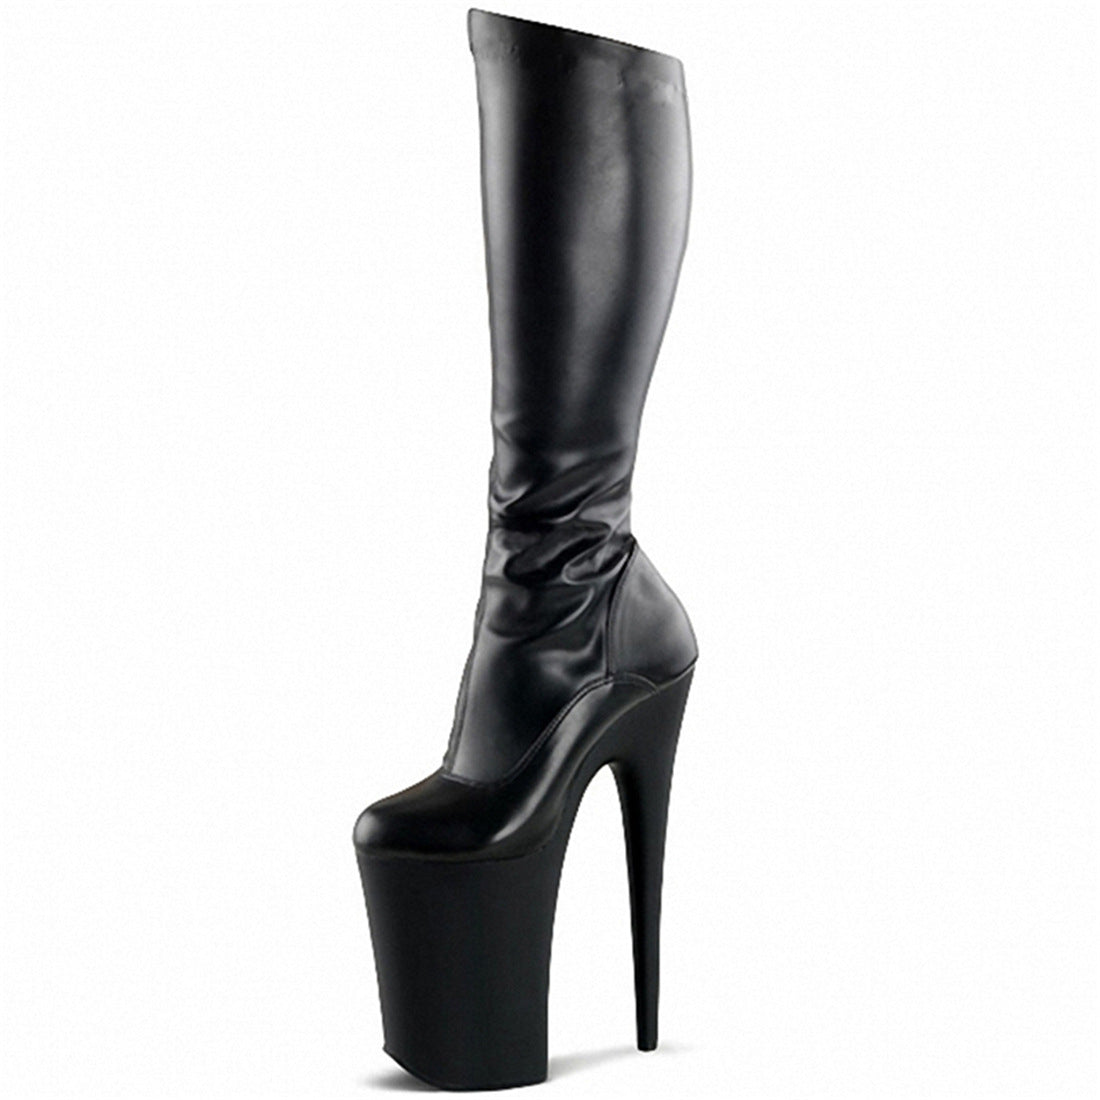 Black Patent Leather High Heel Boots